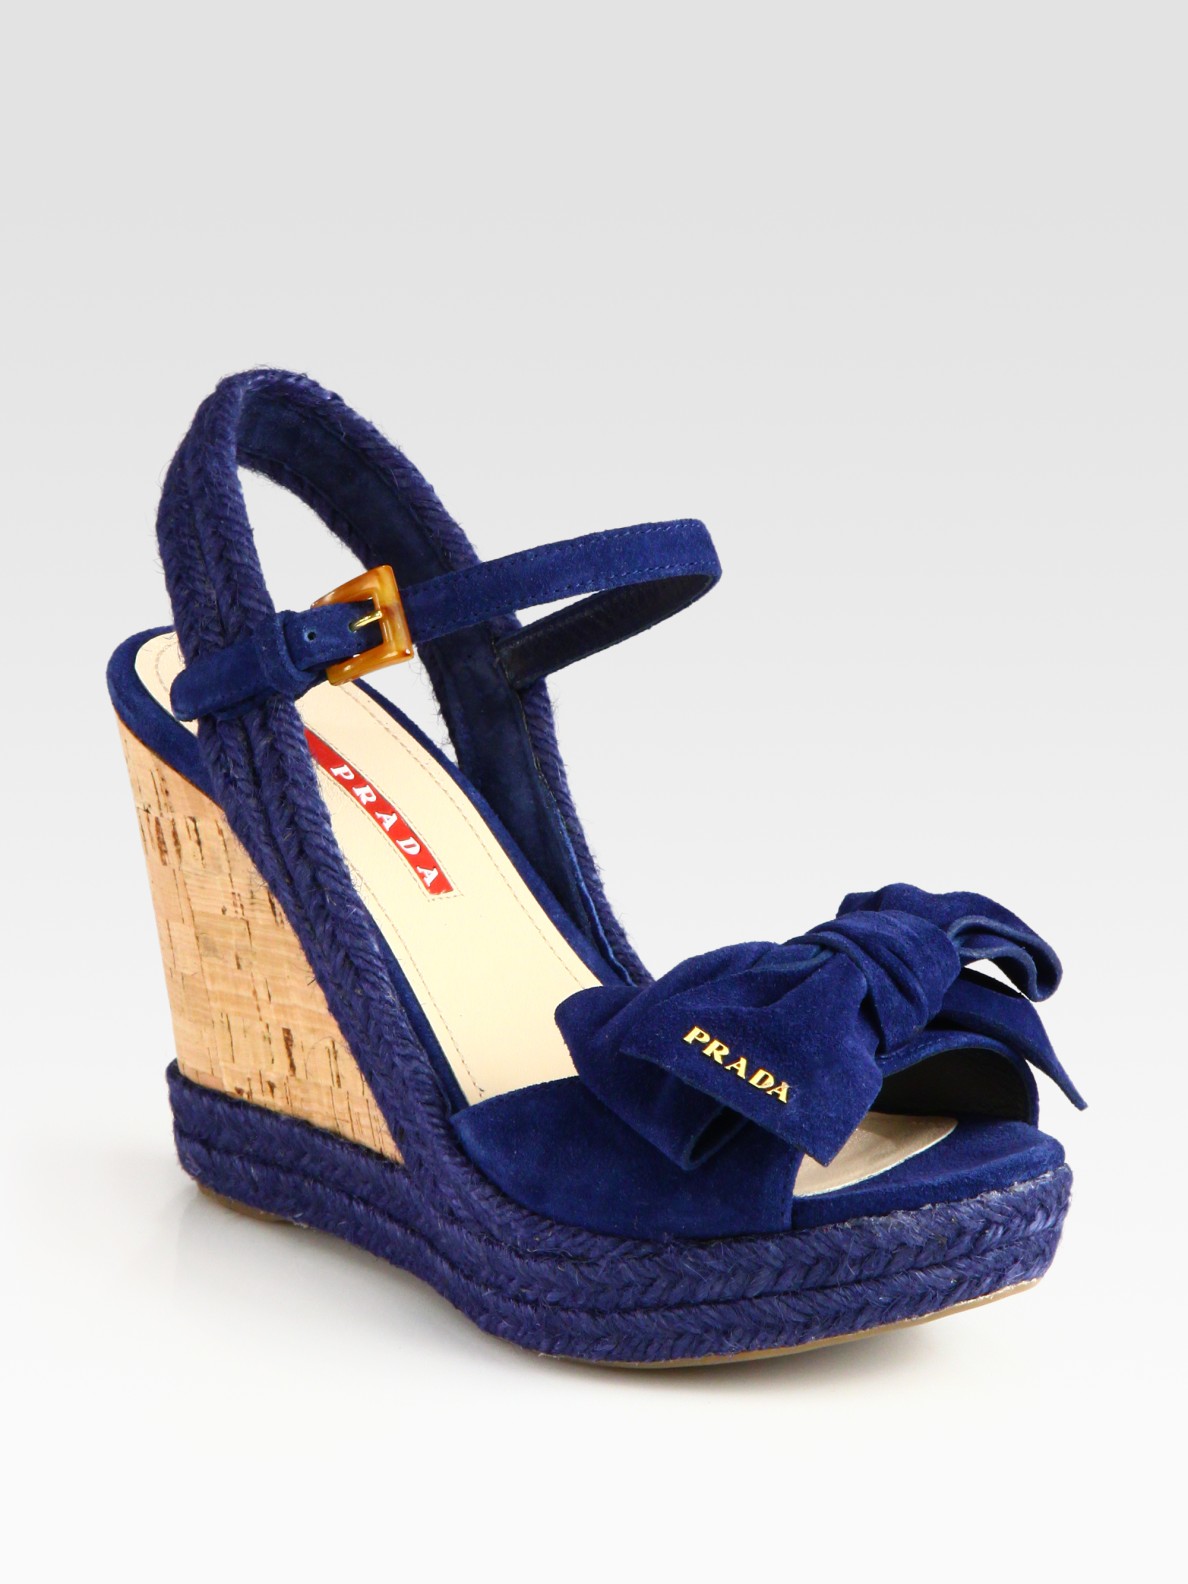 Prada Suede Espadrille Slingback Wedge Sandals with Bow in Blue | Lyst